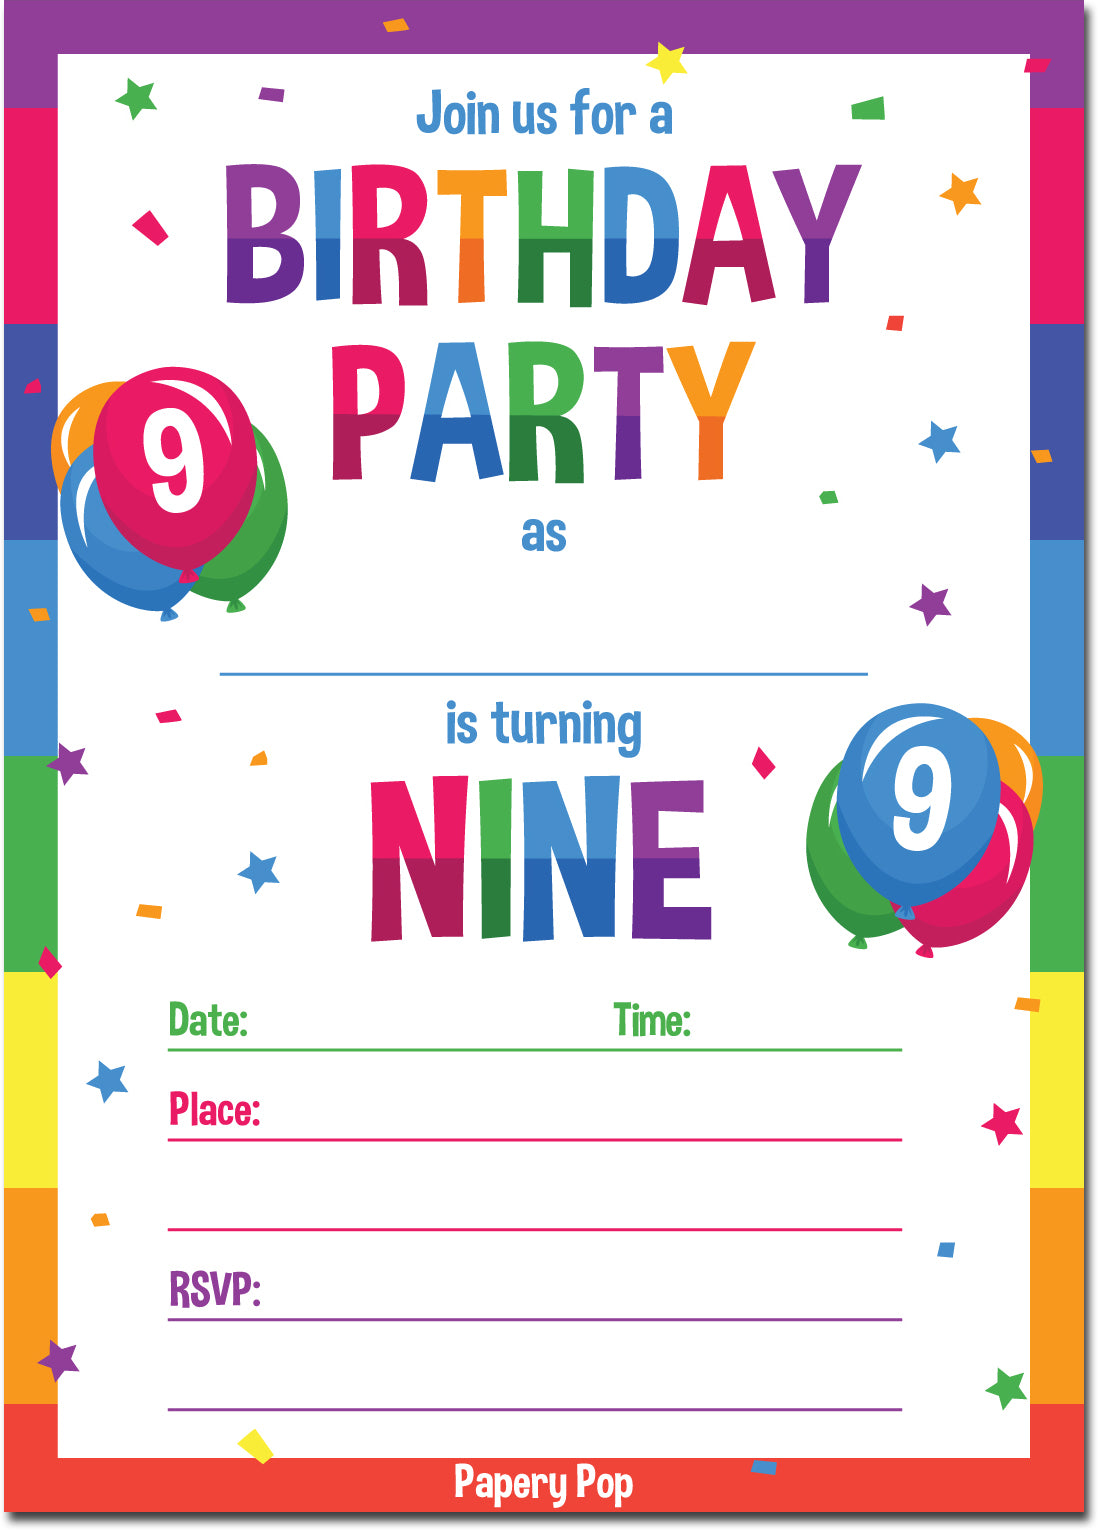 9-year-old-birthday-party-invitations-with-envelopes-15-count-kids